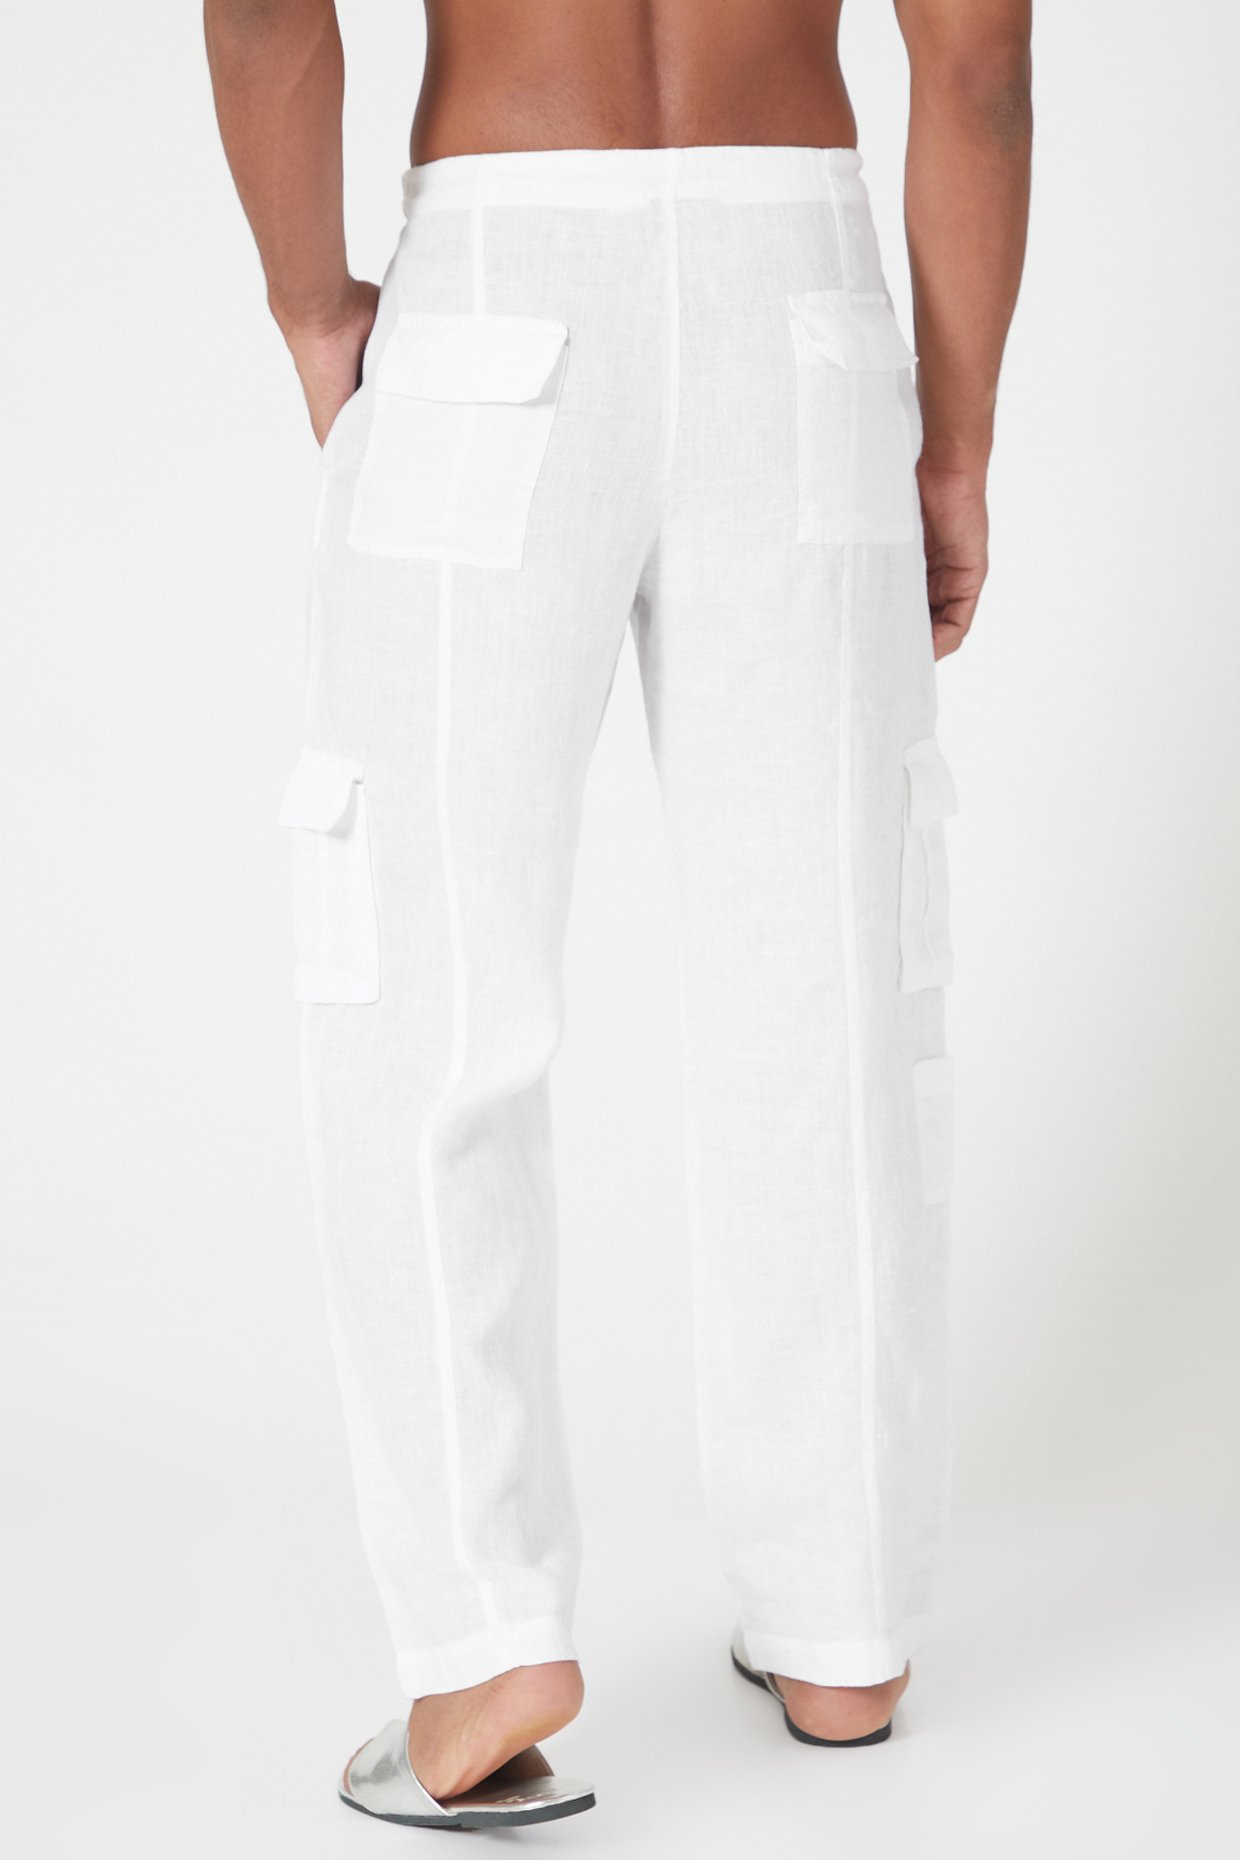 Plain Mens Cargo Jeans, White at Rs 255/piece in Delhi | ID: 21917780091